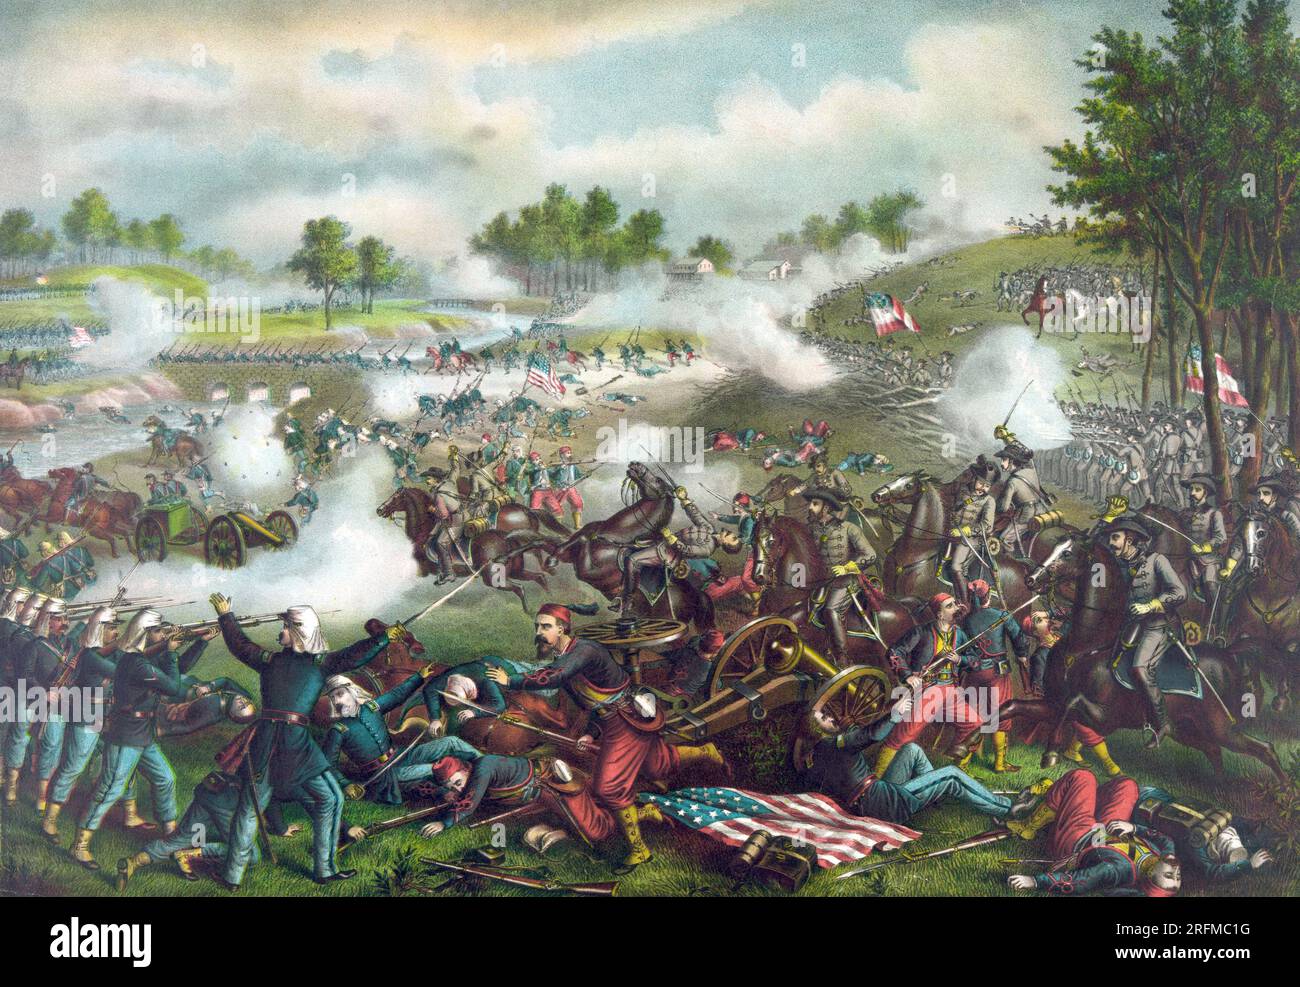 The First Battle of Bull Run; also known as First Manassas (the name used by Confederate forces); was fought on July 21; 1861; in Prince William County; Virginia; near the city of Manassas; not far from Washington; D.C. It was the first major battle of the American Civil War. Stock Photo